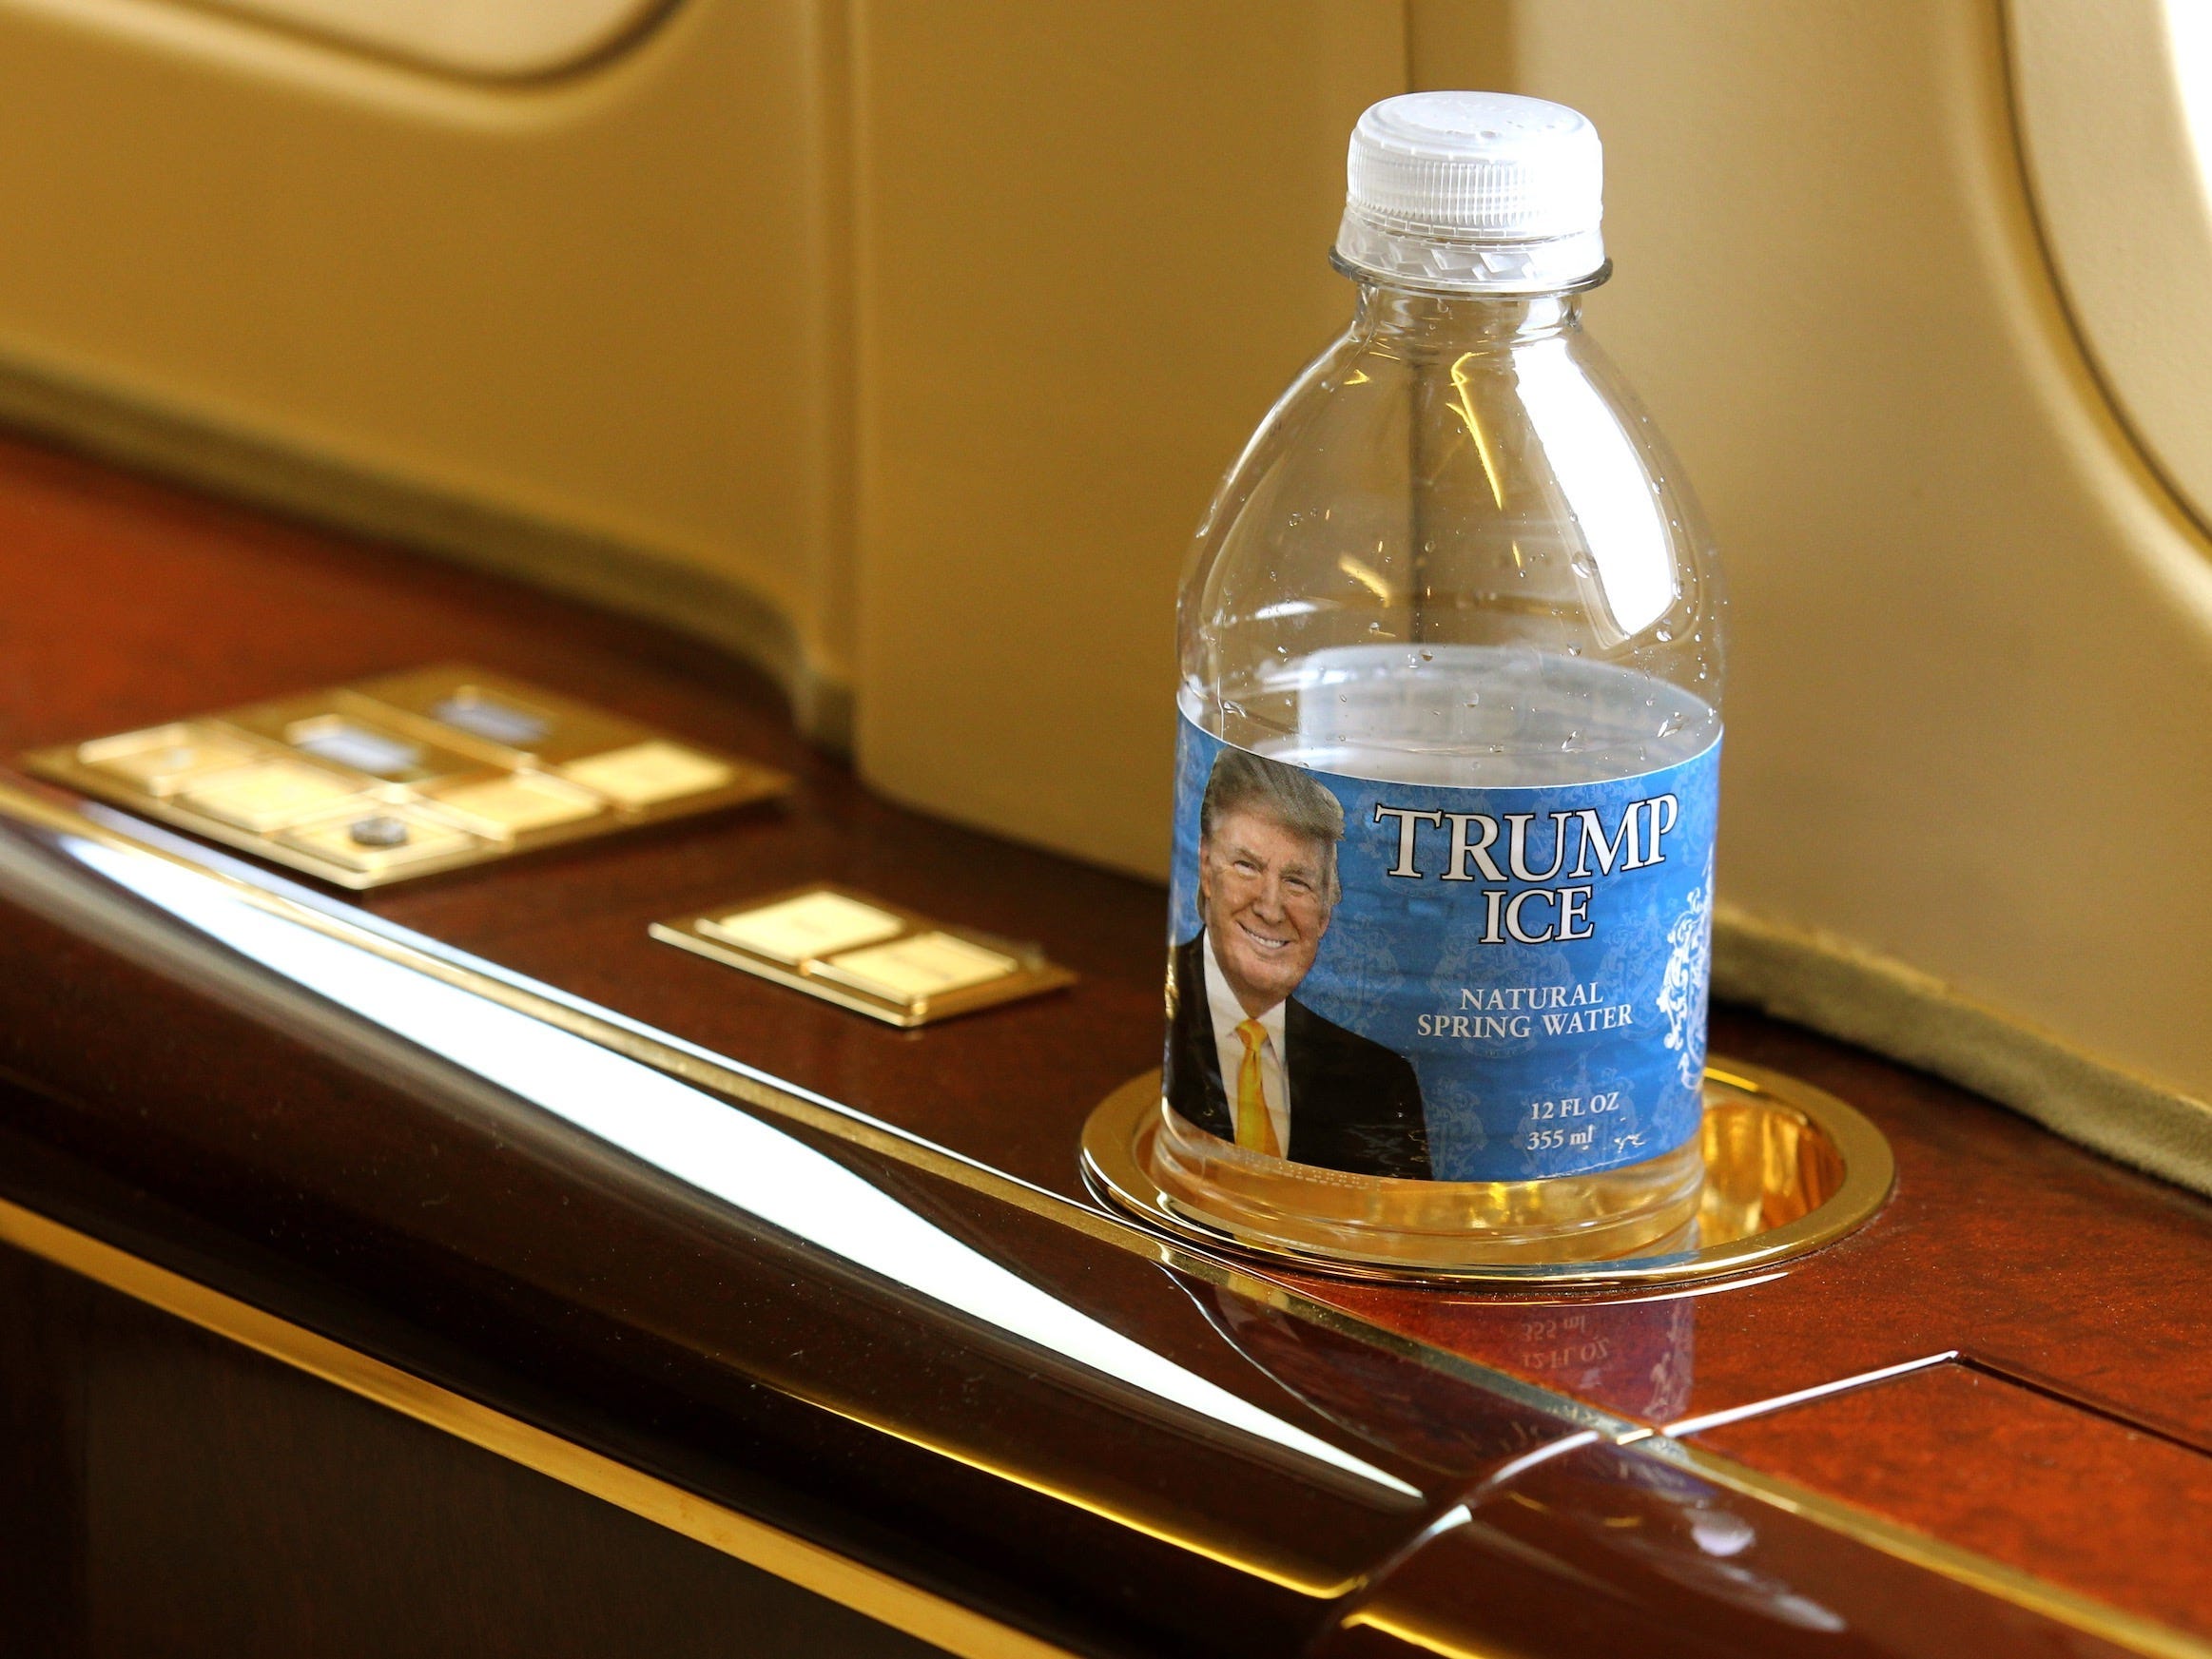 Trump-branded water bottle on the 757.